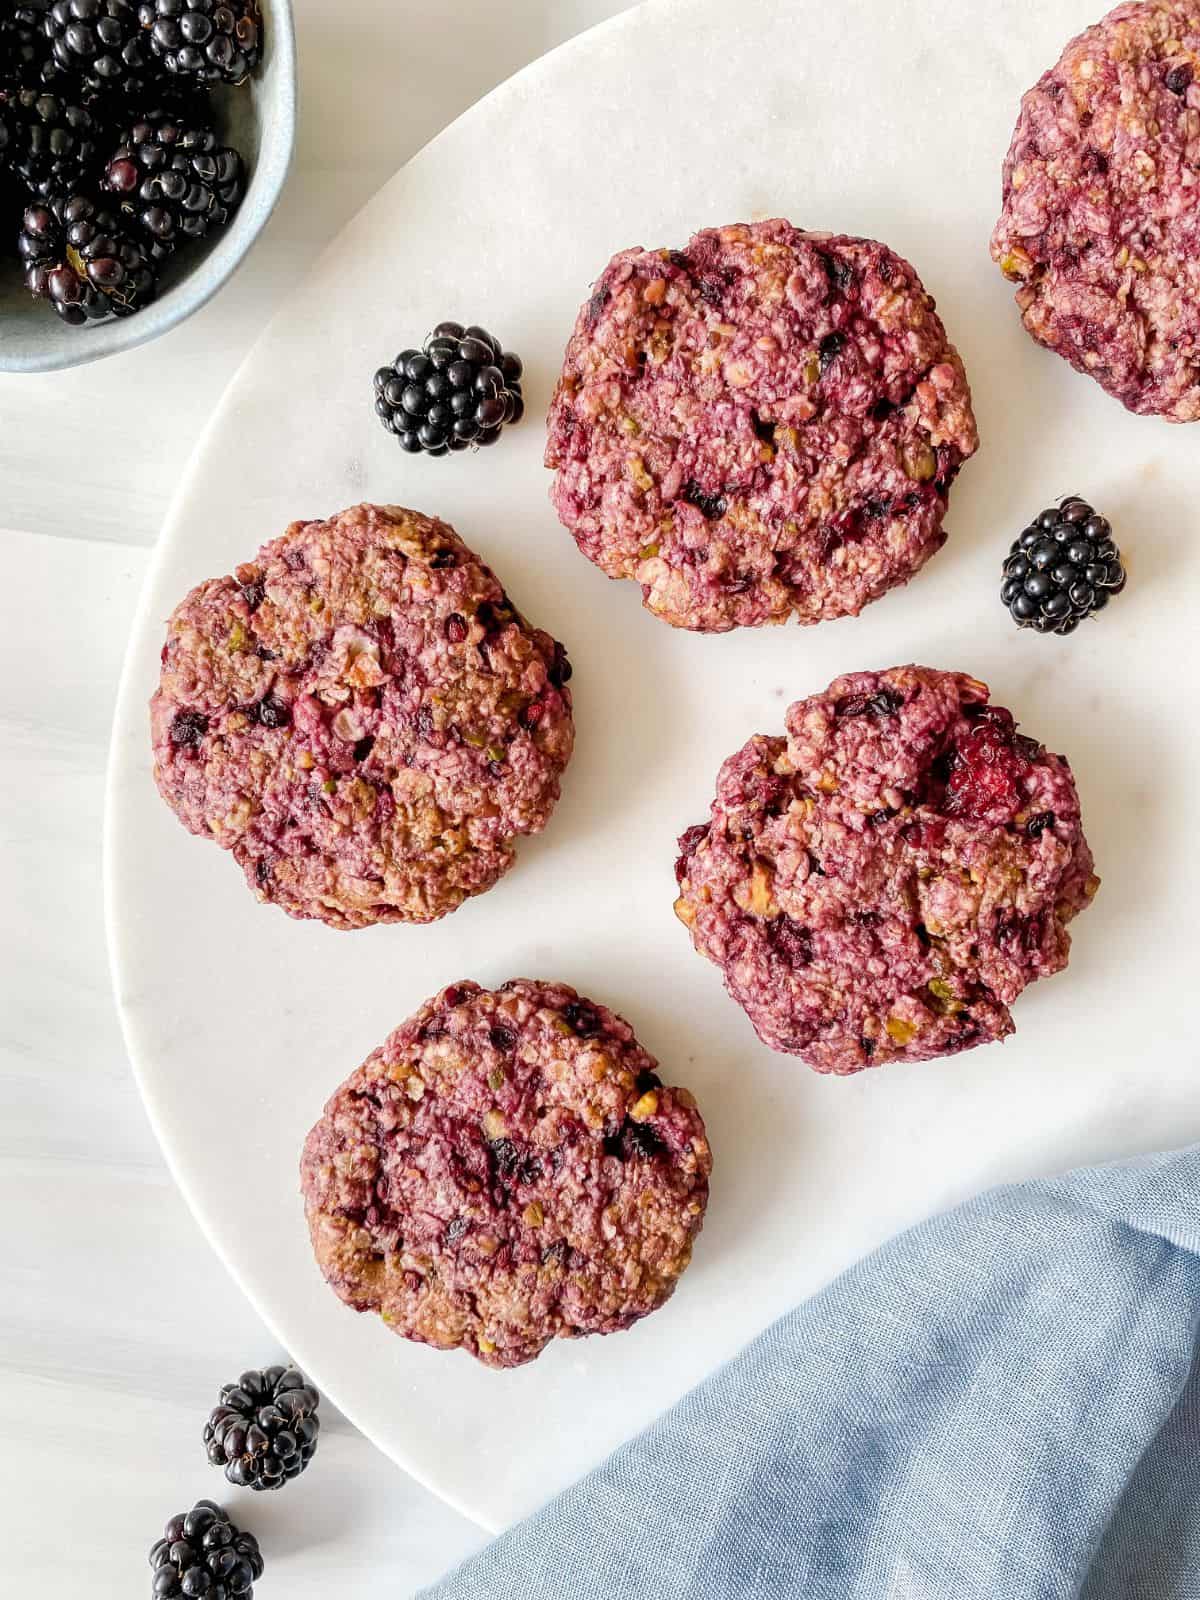 blackberry oatmeal cookies next to a blue cloth and a bowl of blackberries.